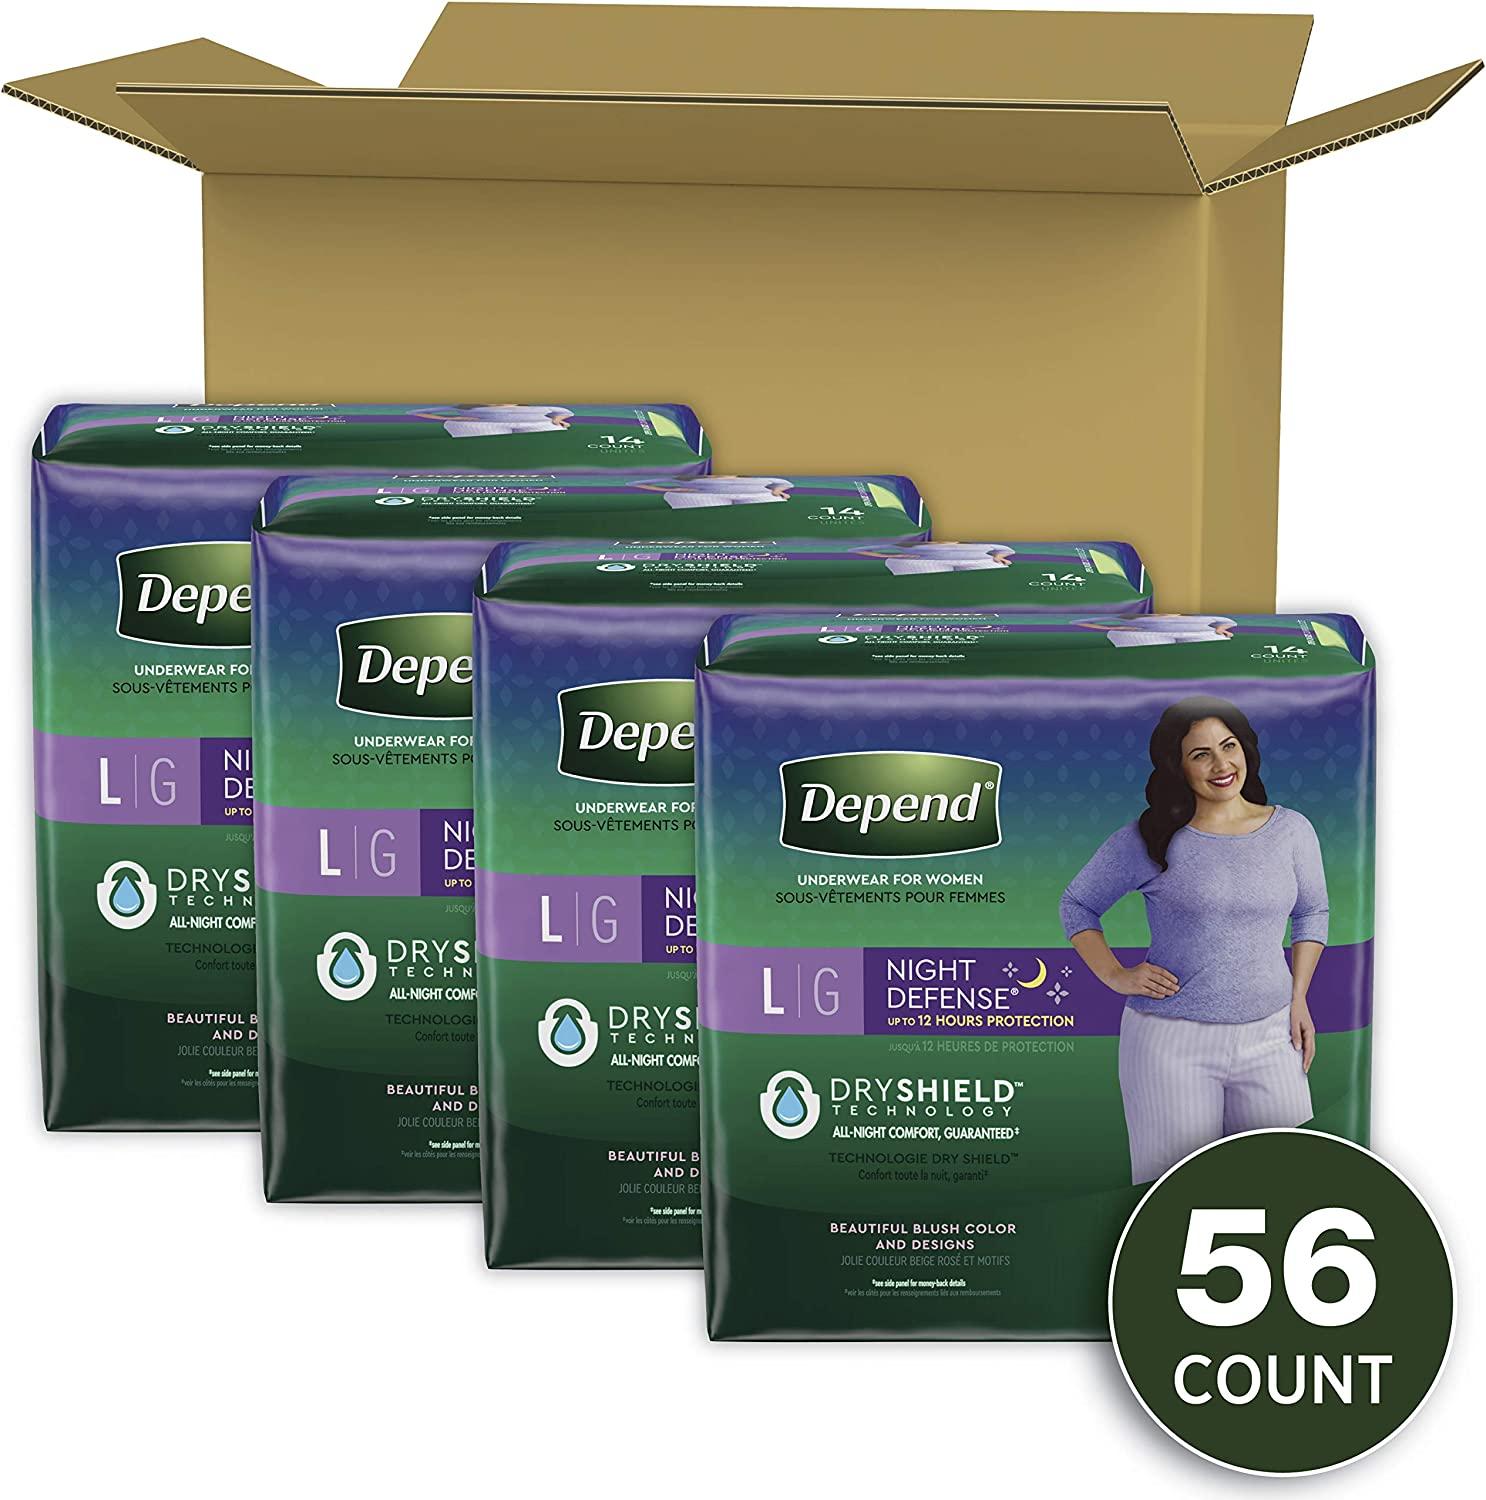 Extra Large Overnight Depends - Night Defense Incontinence Underwear for  Women,12 count - XL